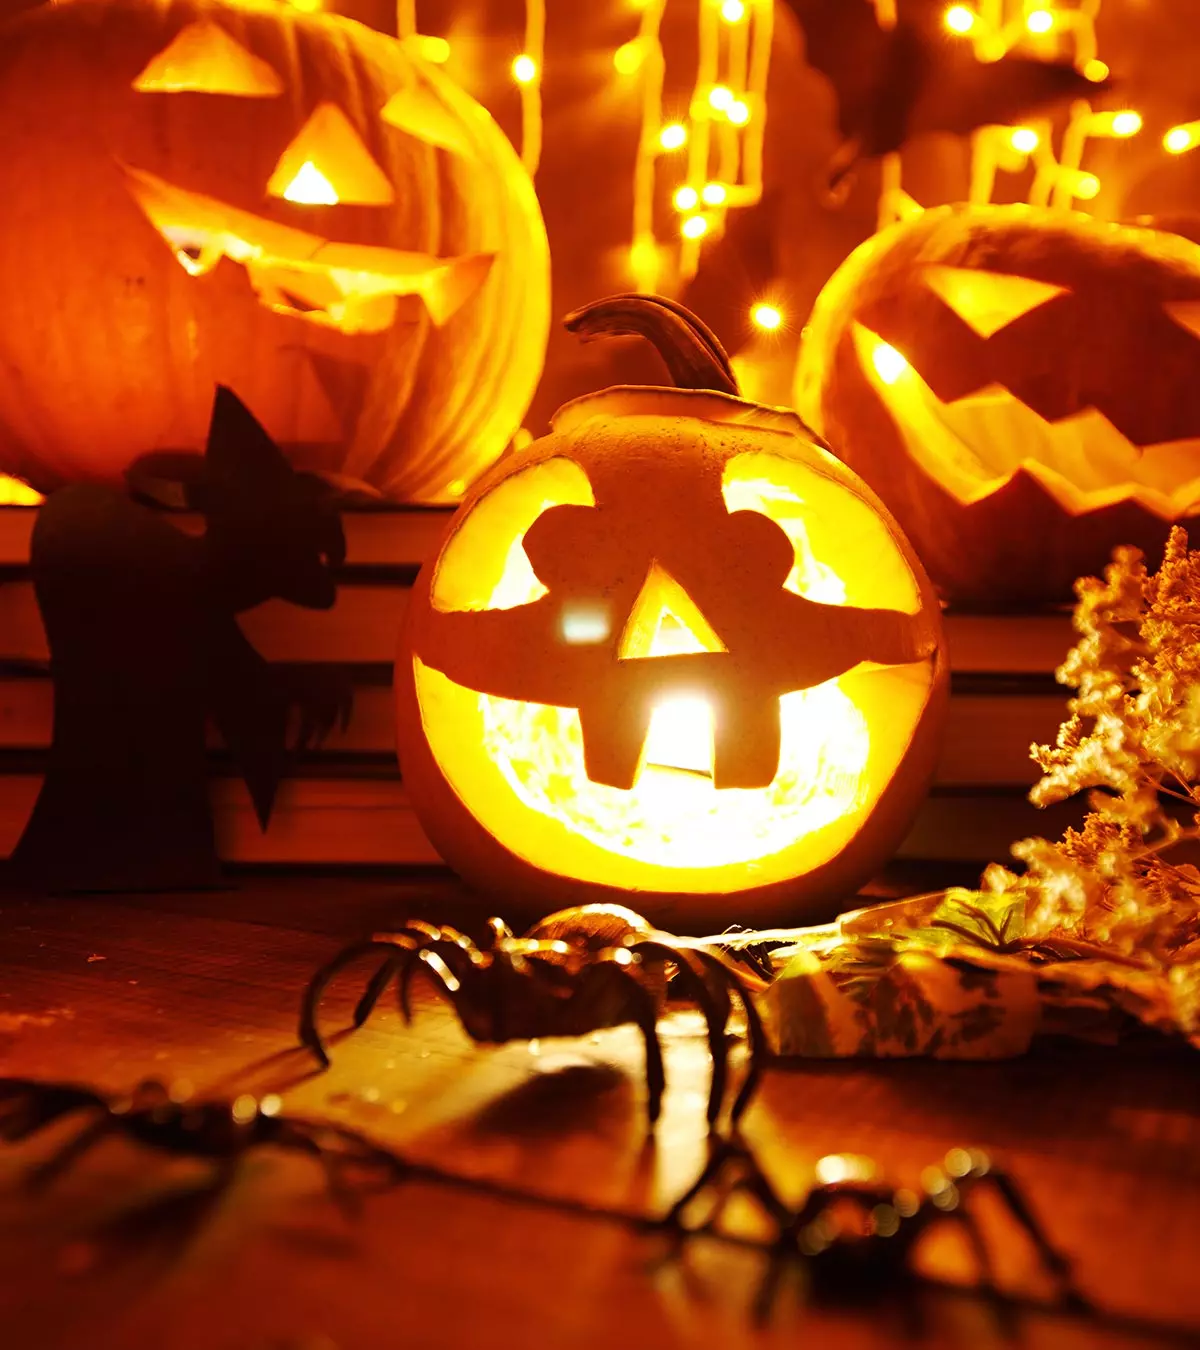 Best Halloween Songs, Poems & Quotes For Kids To Celebrate